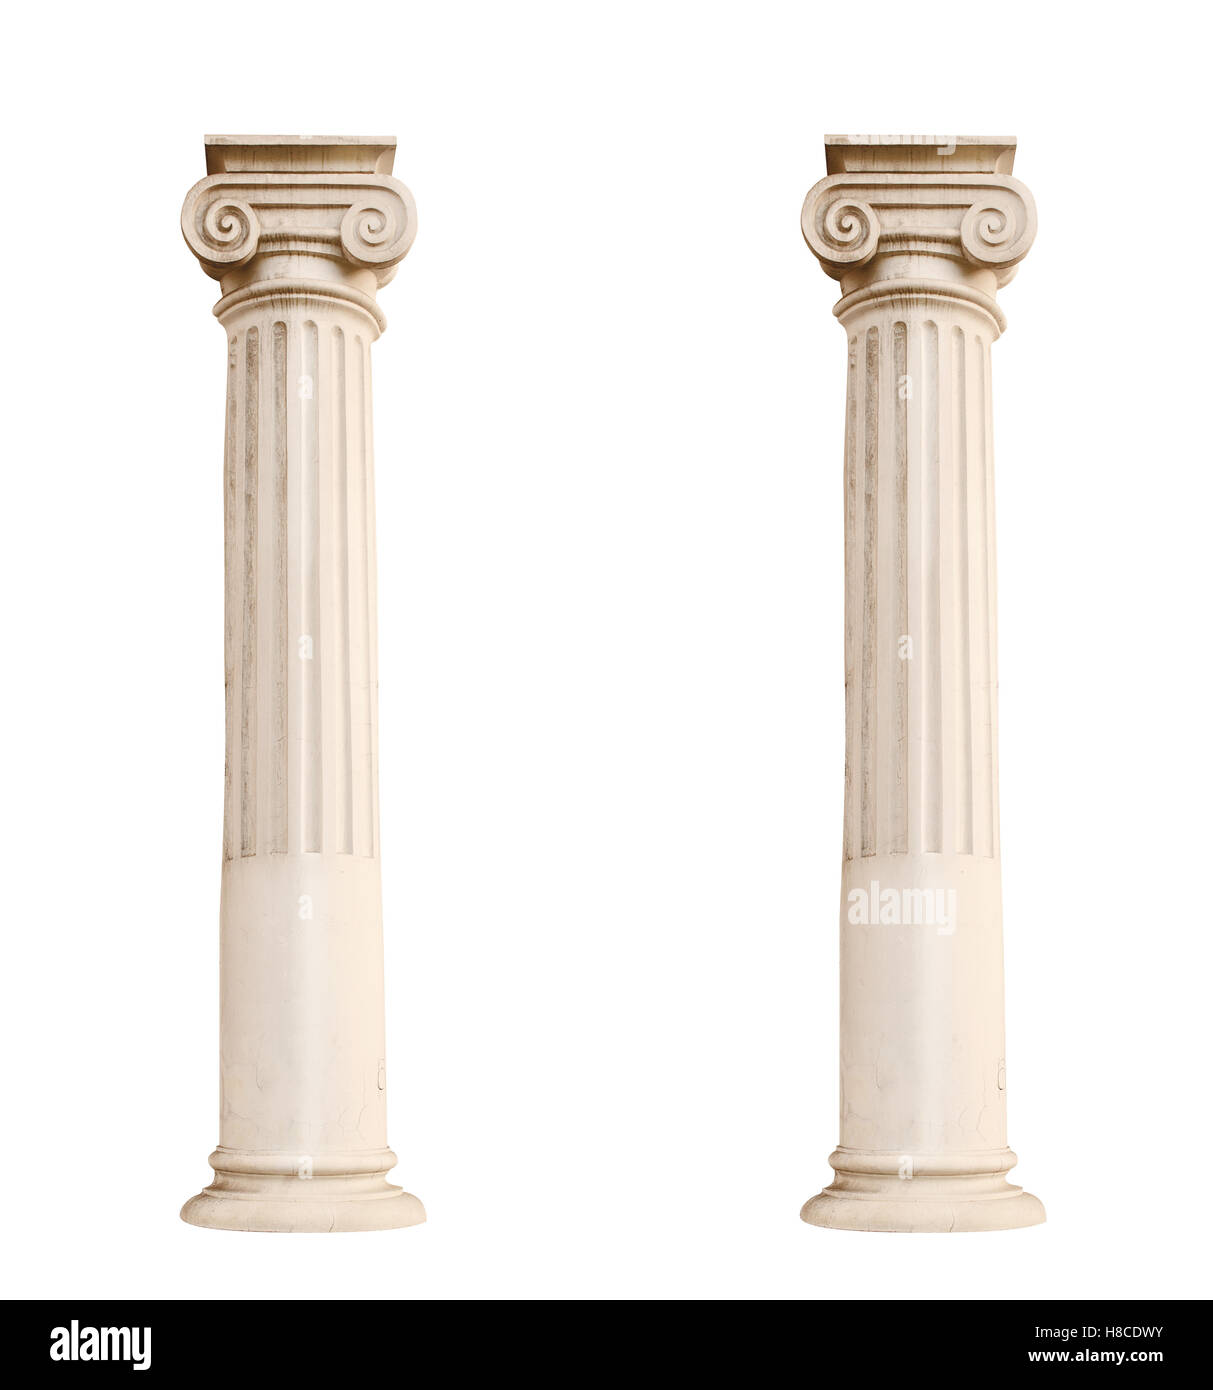 architectural columns isolated on a white background Stock Photo